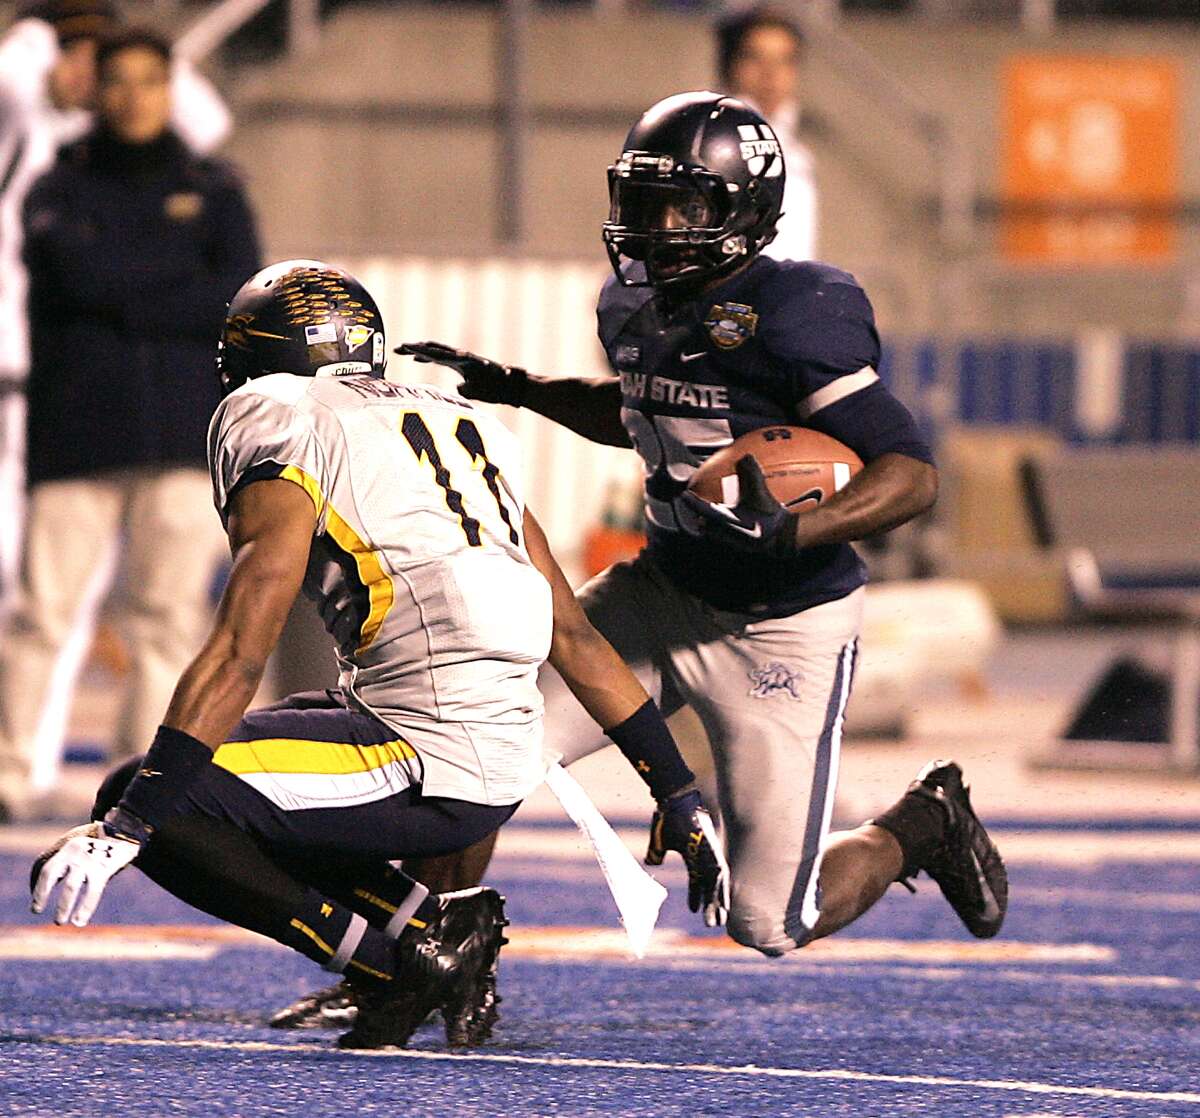 Famous Idaho Potato Bowl, Dec. 15: Utah State 41, Toledo 15; Bronco Stadium in Boise, Idaho; Payout: $325,000 PHOTO: Utah State's Kerwynn Williams (25) rushes for a first down against Toledo's Cheatham Norrils (11) during the second half of the Famous Idaho Potato Bowl.